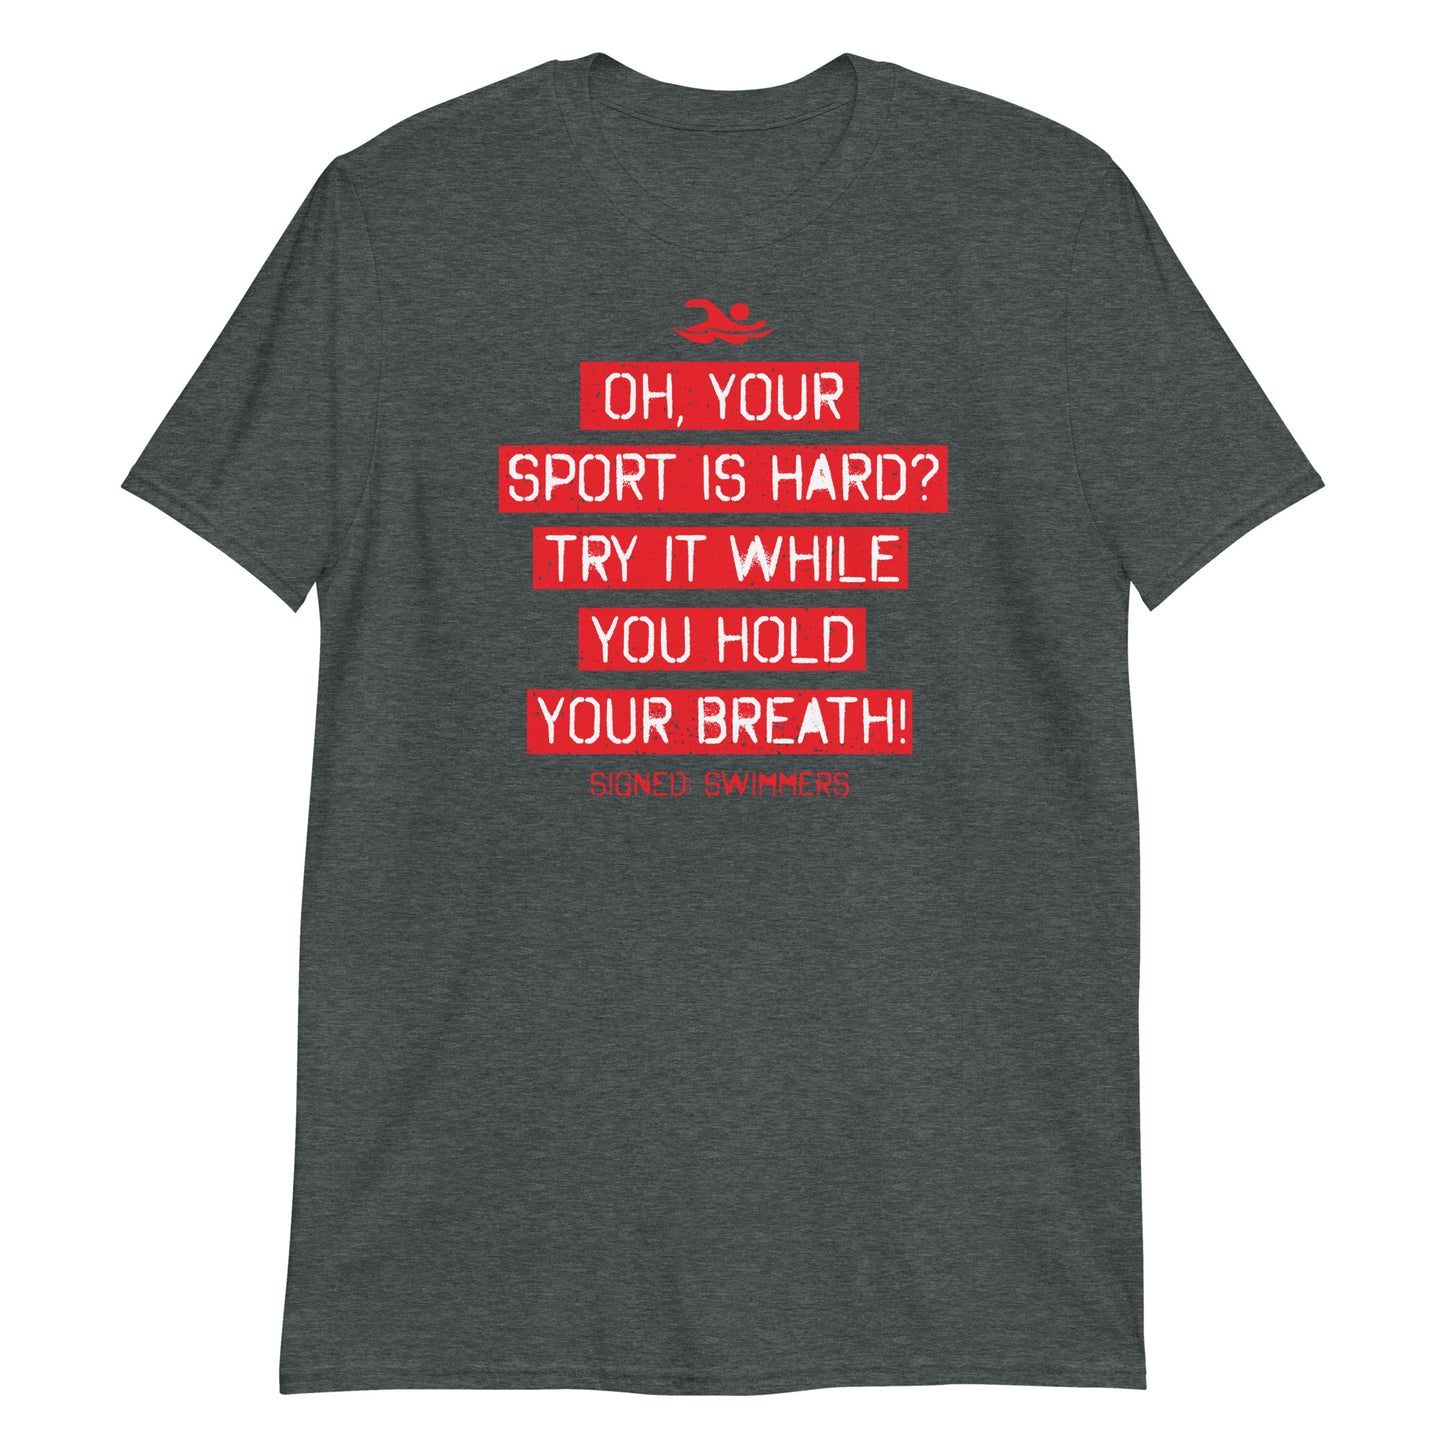 Oh Your Sport Is Hard Funny Swimmer Quote T Shirt - TrendySwimmer